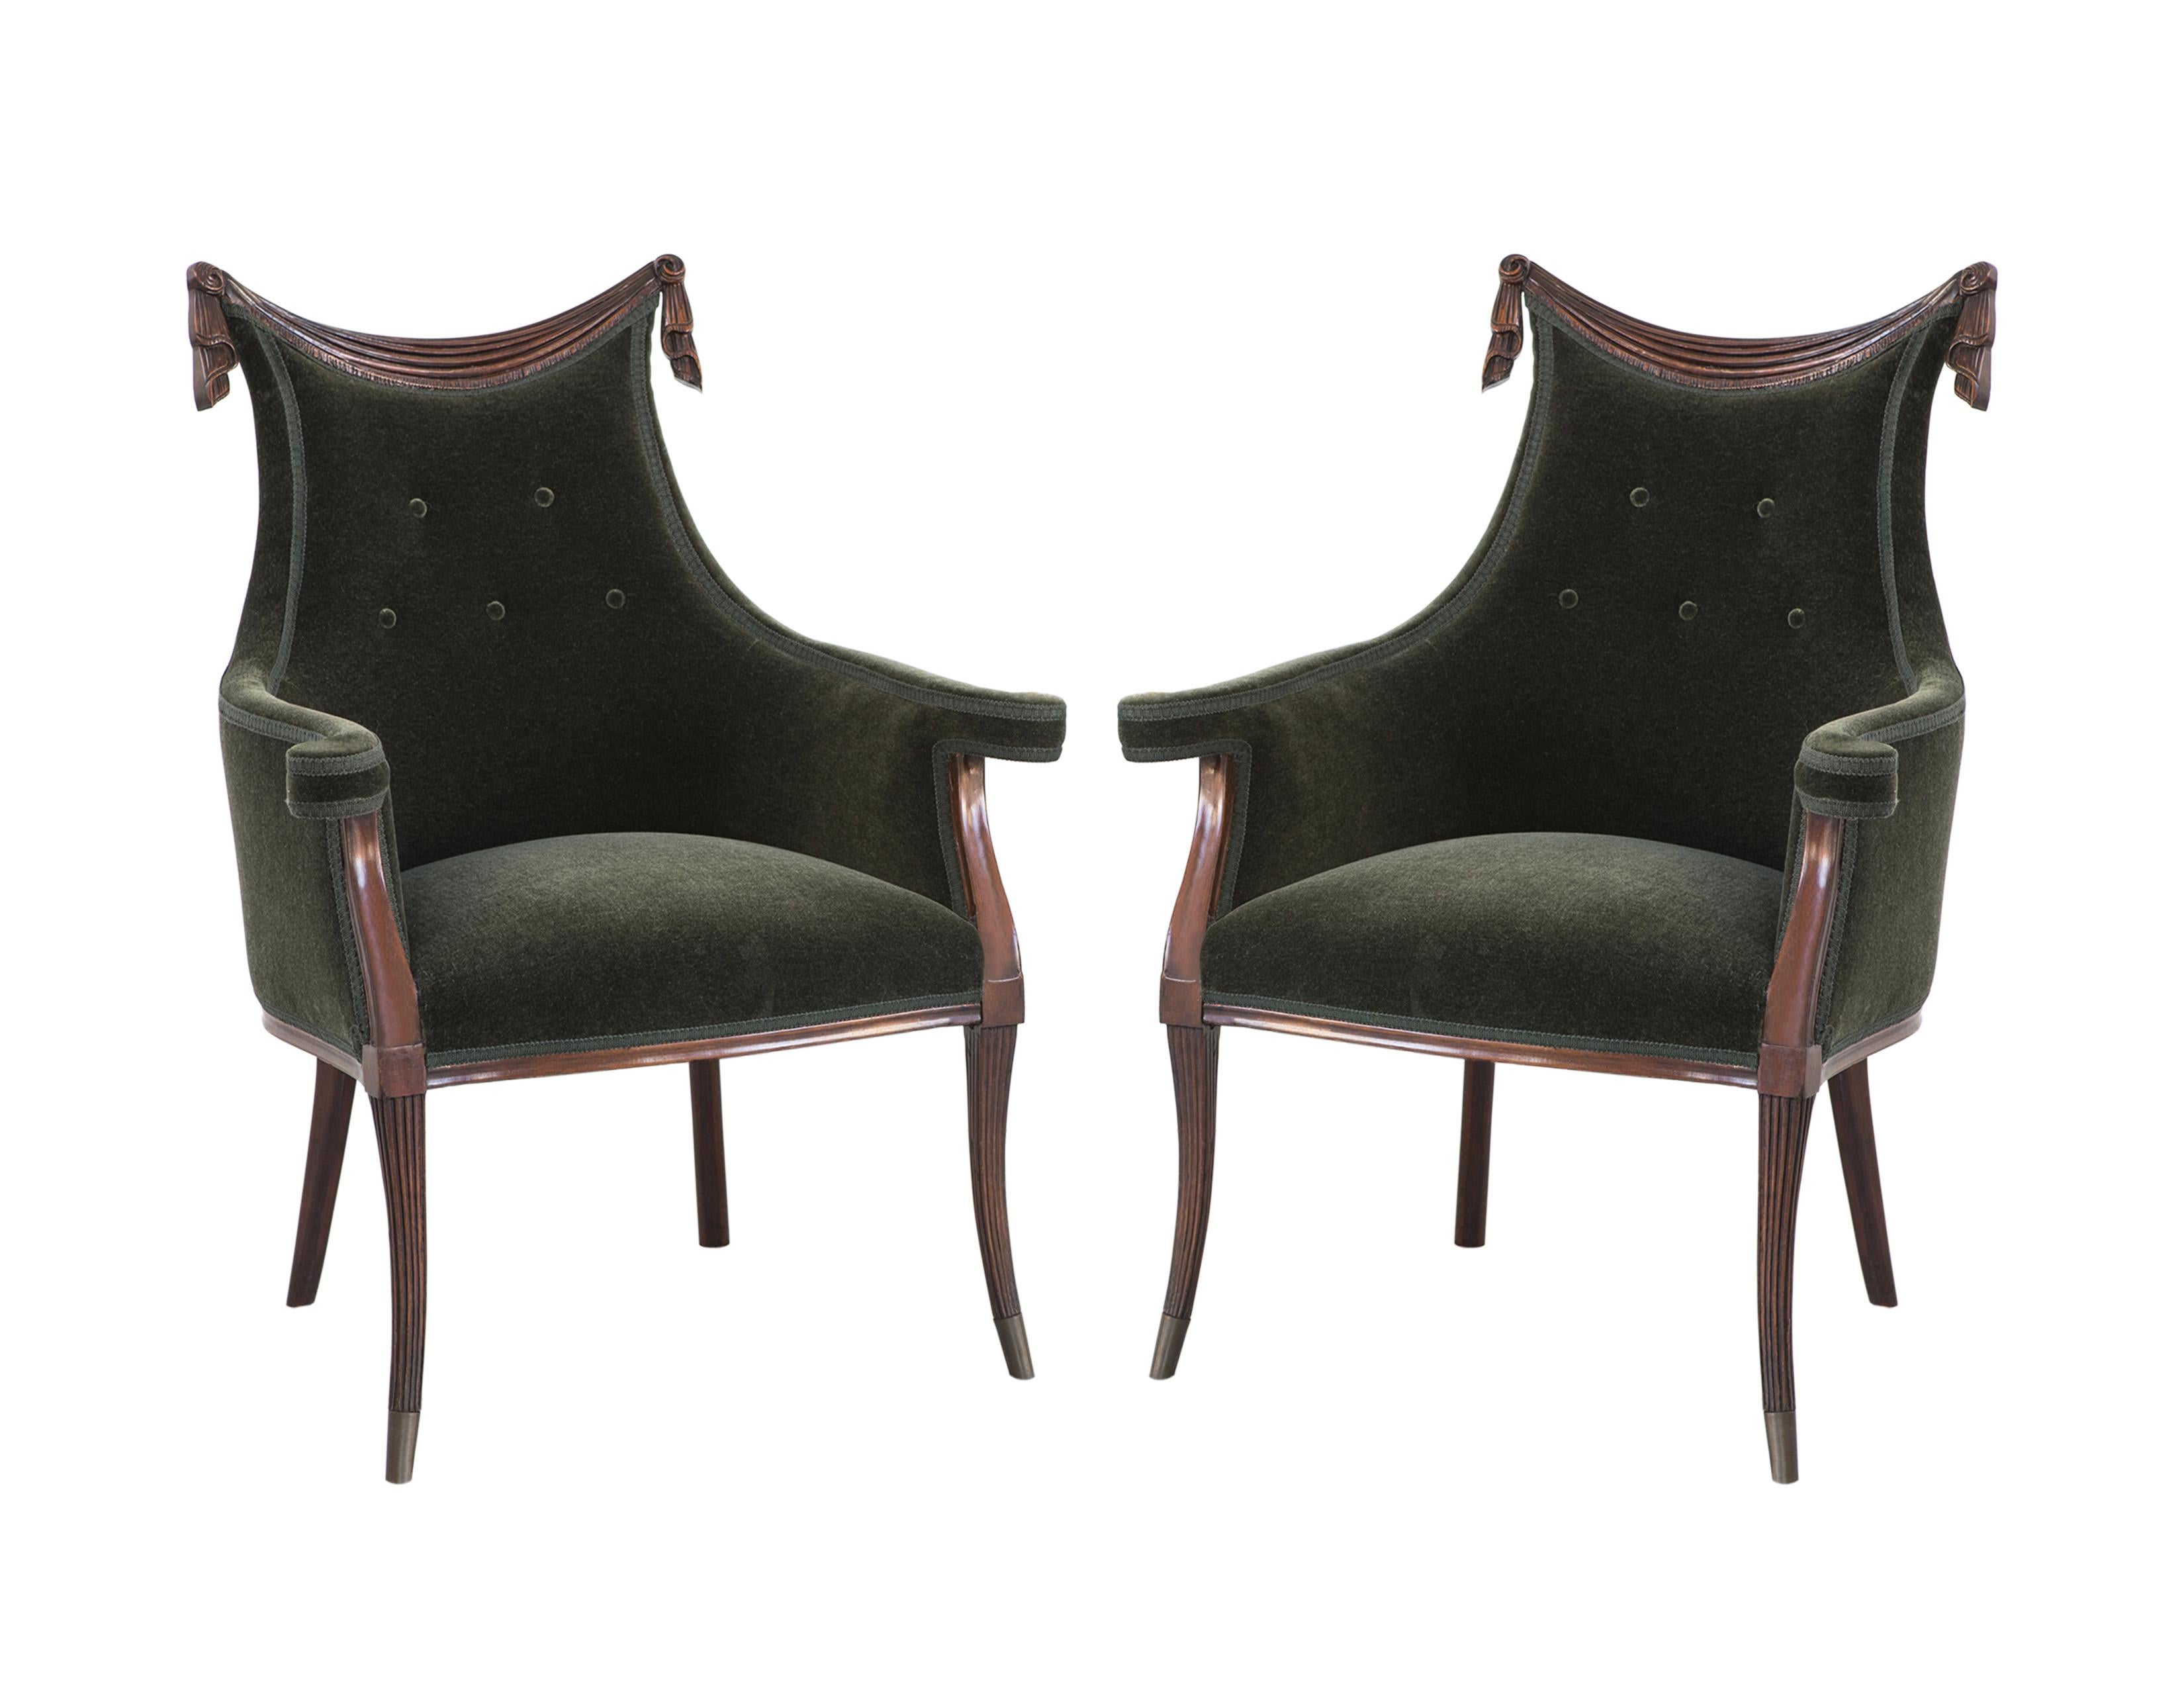 Bringing new life to the classic! Stunning pair of 1940's Hollywood Regency chairs by Grosfeld House. Each chair in ebonized walnut and features a hand-carved draped design top stile, button detailed tufted back support and the armrests upholstered